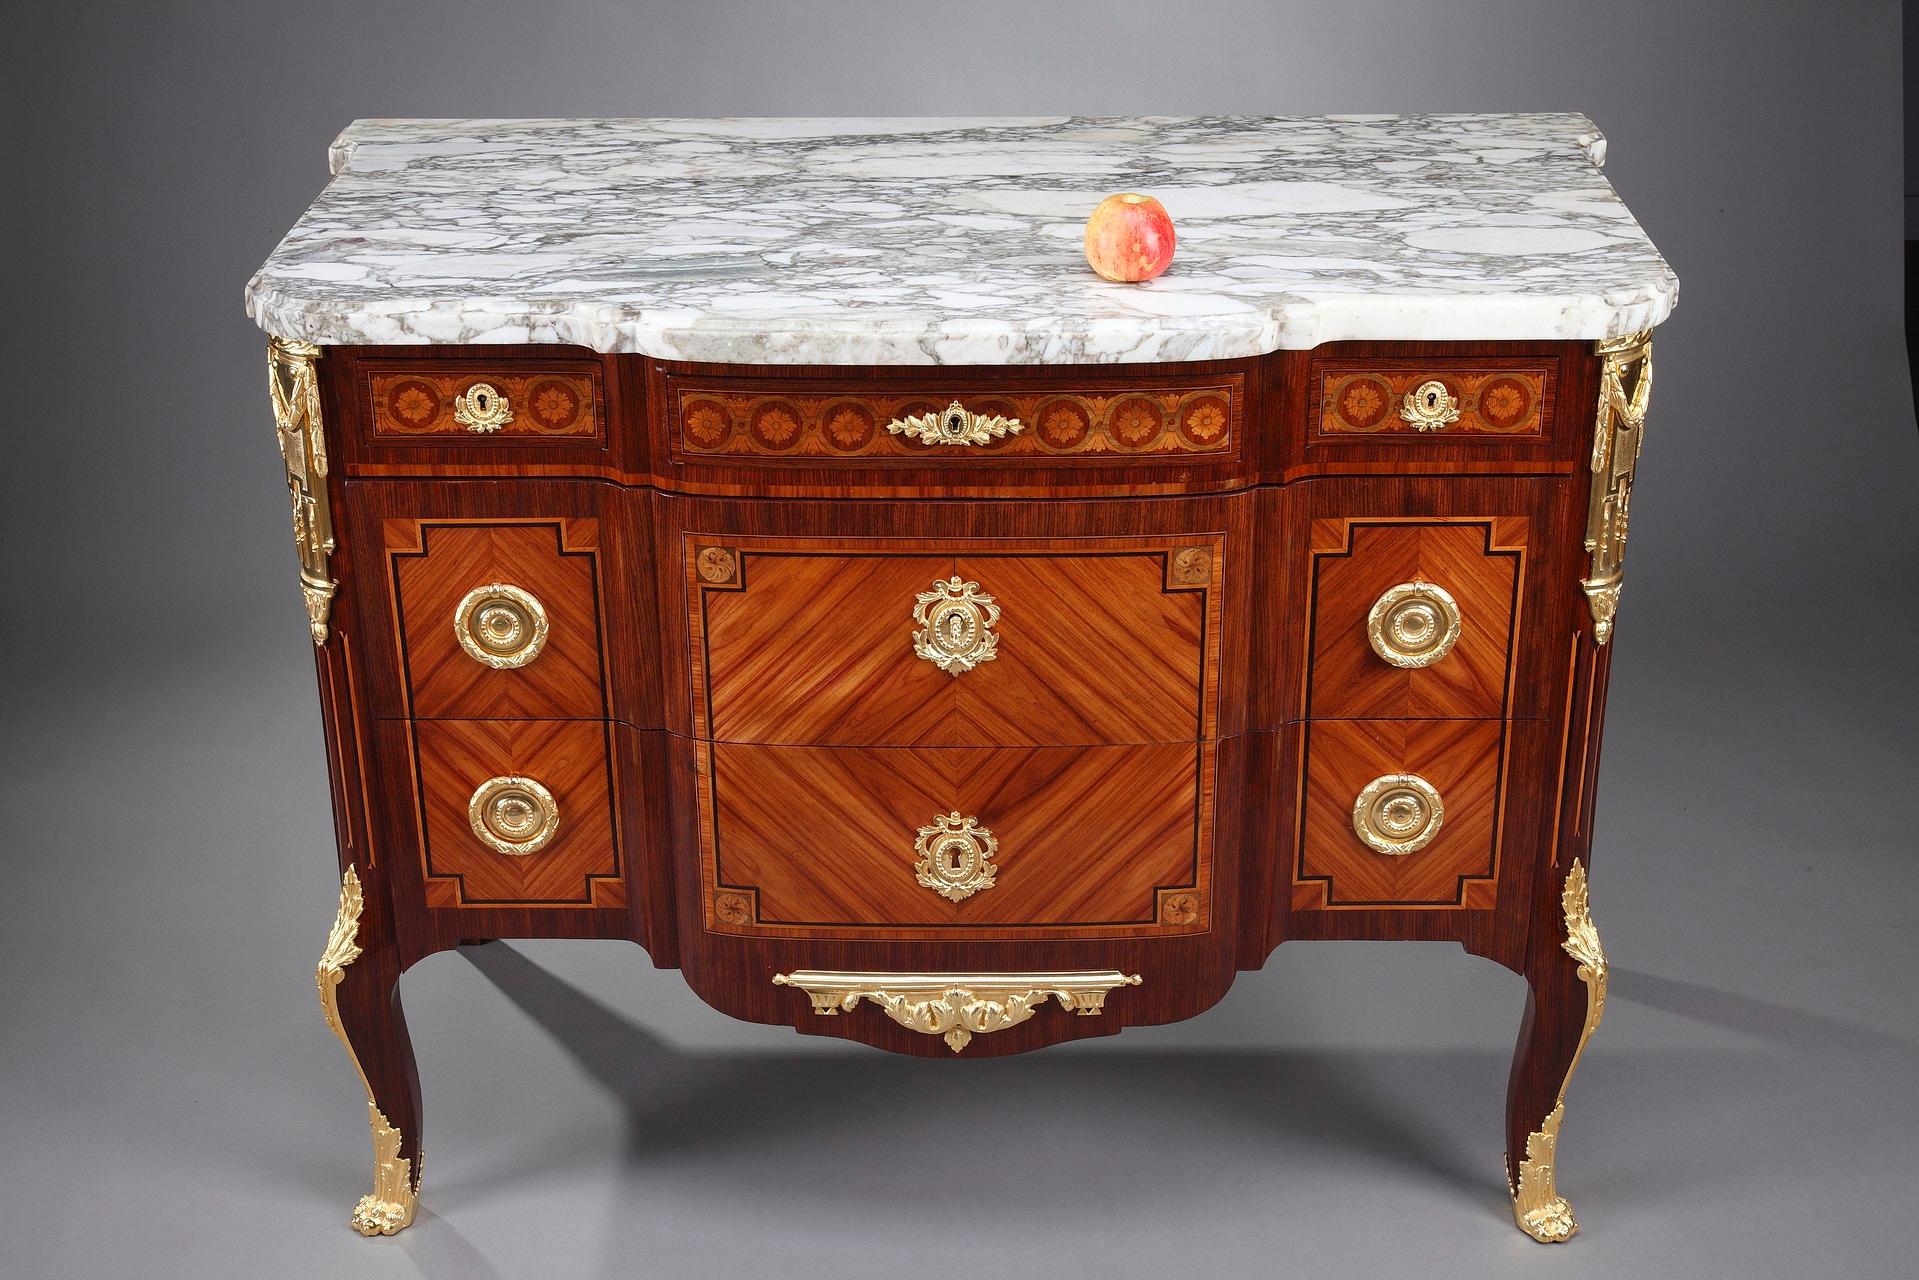 Late 19th century commode in Louis XV-Louis XVI style with 5 drawers, crafted of rosewood veneer and amaranth wood. This chest of drawers is topped by a Breche molded marble top. A marquetry motif of interlacing and flowers runs under the marble top